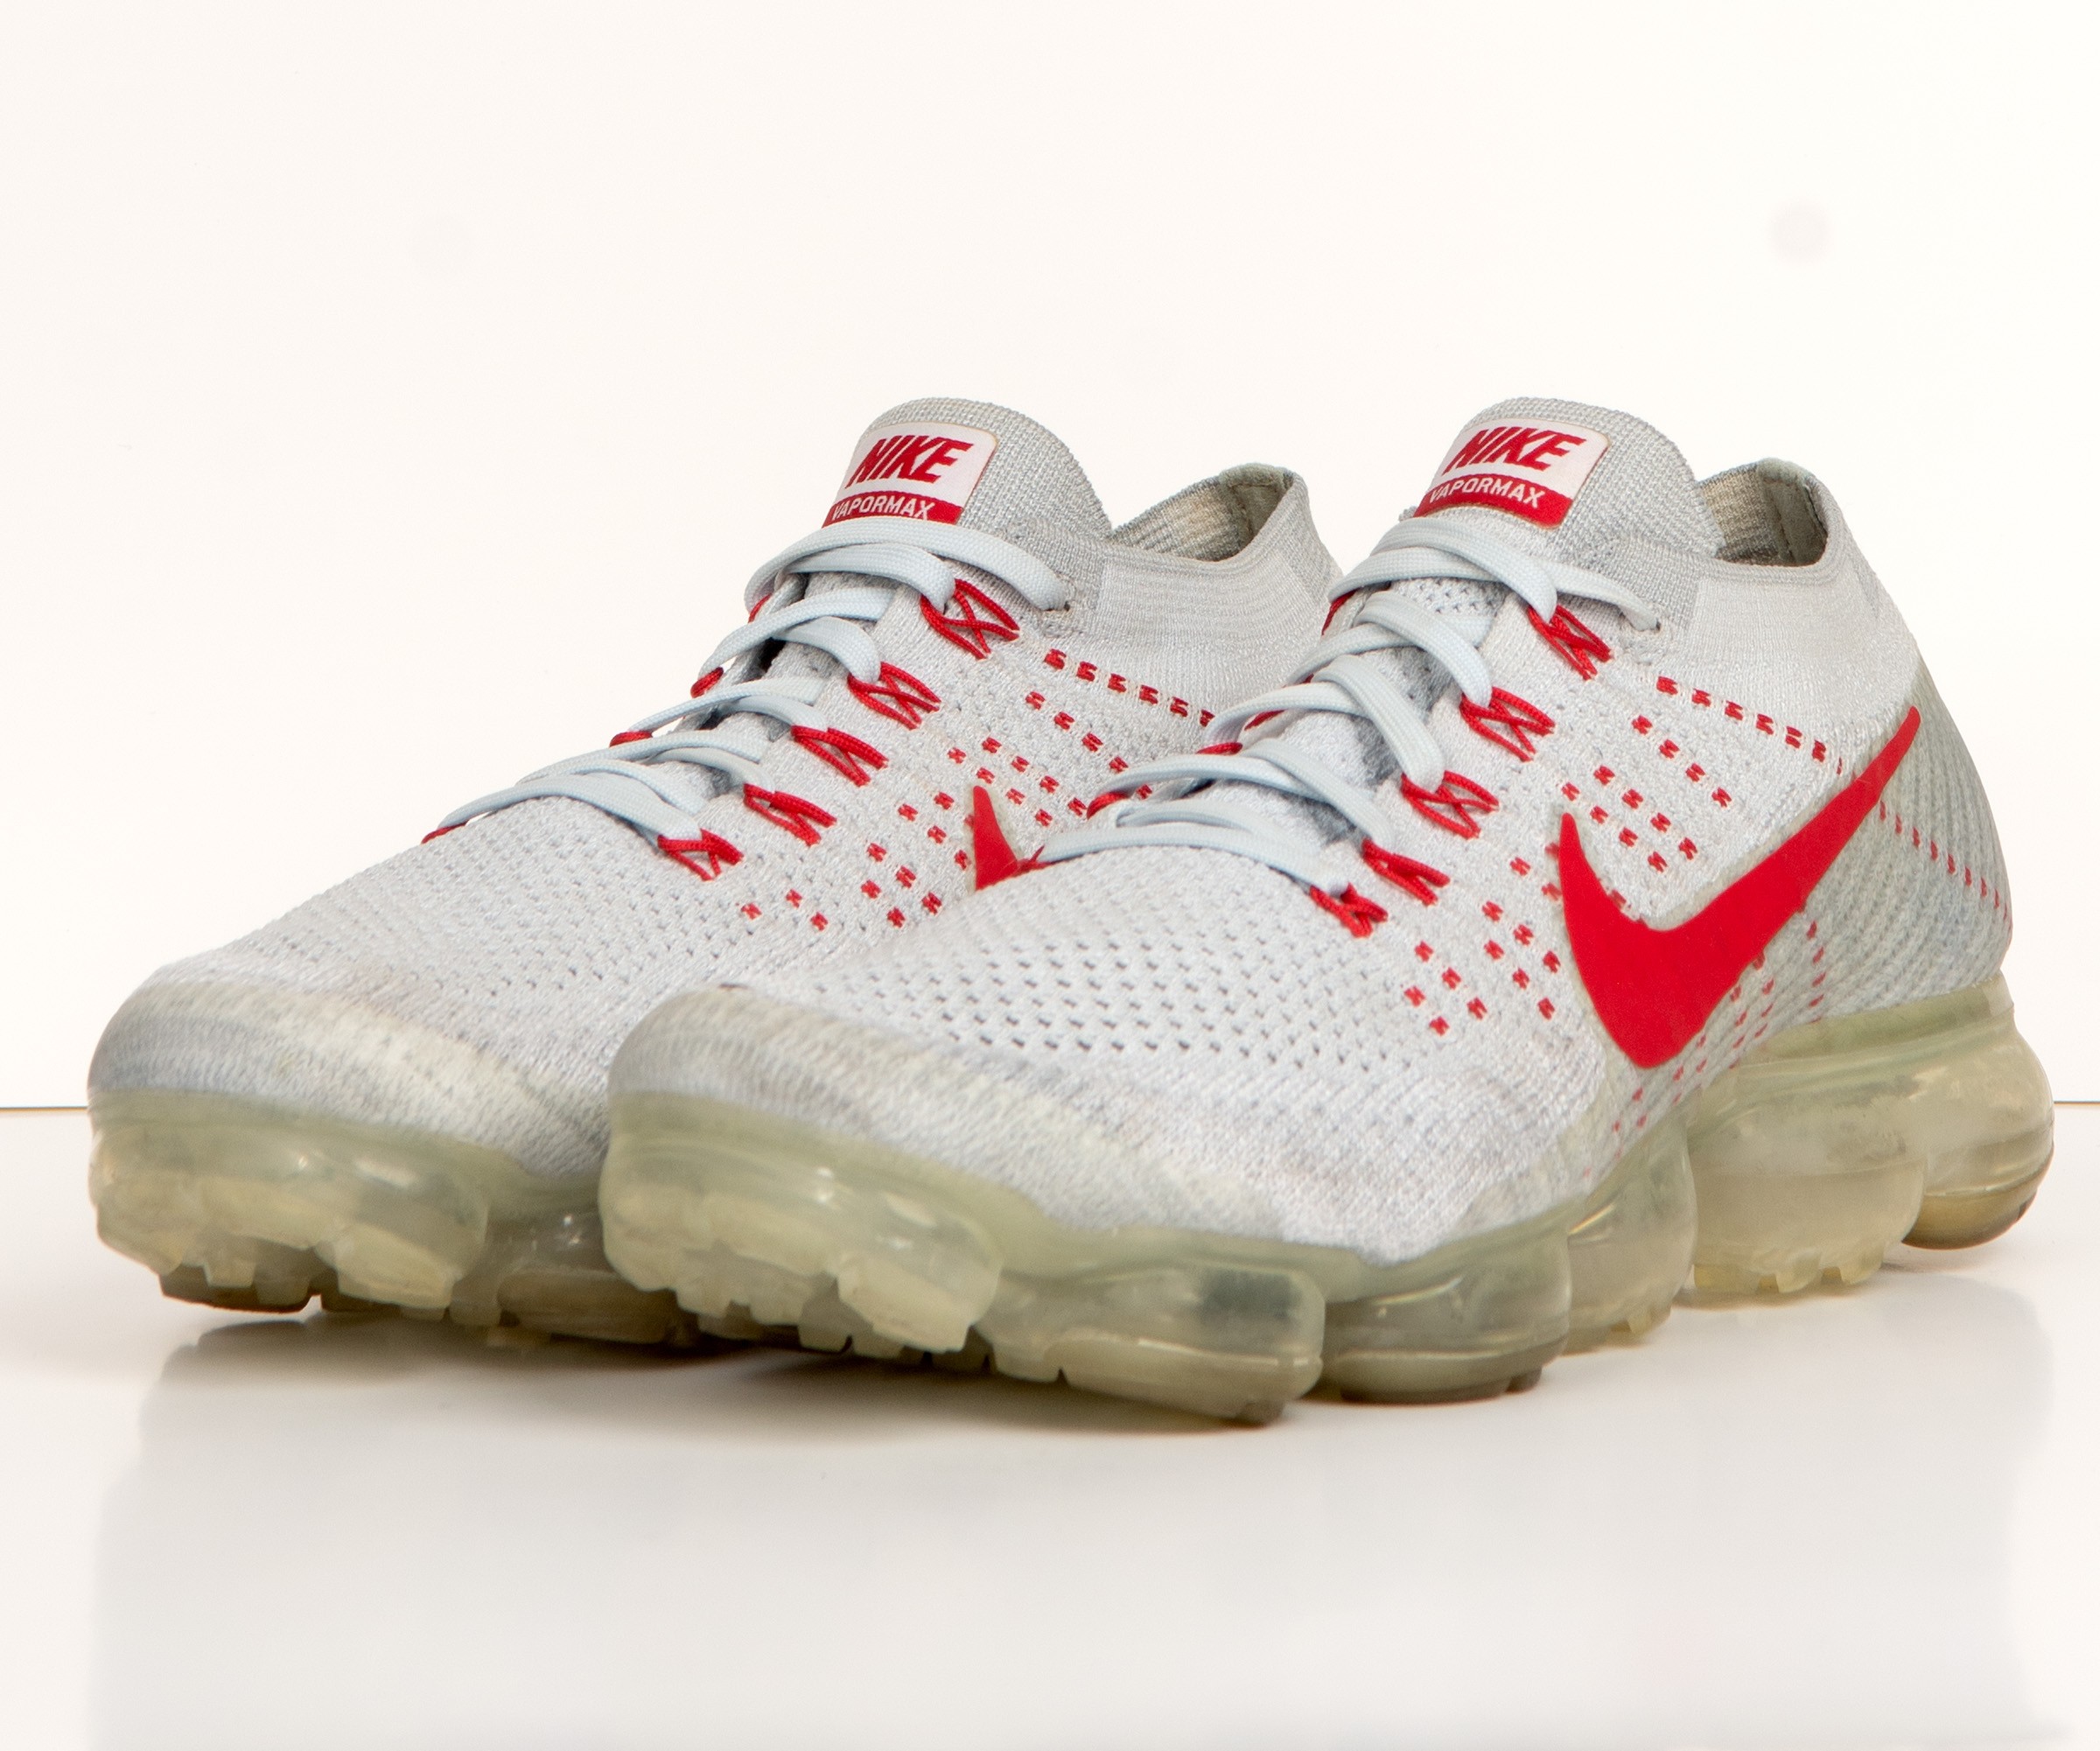 RE-POCKETS NIKE TRAINERS VAPORMAX BUBBLE SOLE WHITE/RED